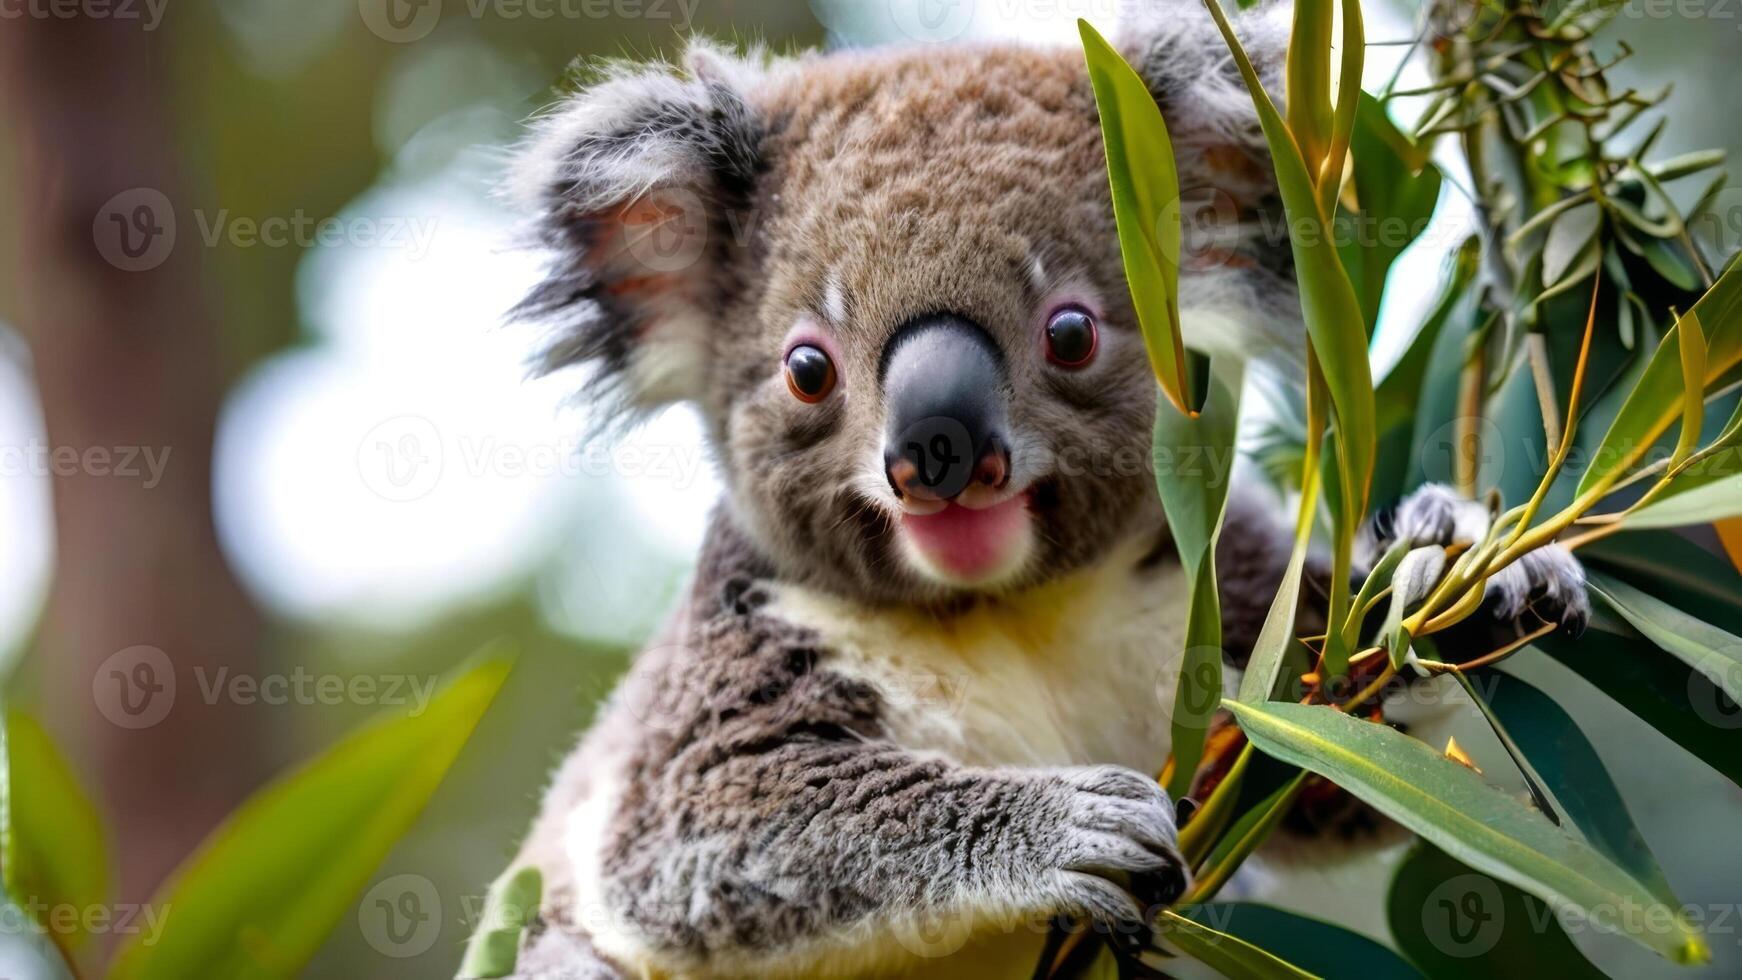 Endearing baby koala resting amidst eucalyptus foliage. Vibrant close-up of a fluffy Australian marsupial. Concept of wildlife conservation, natural habitats, and adorable wild animal. photo